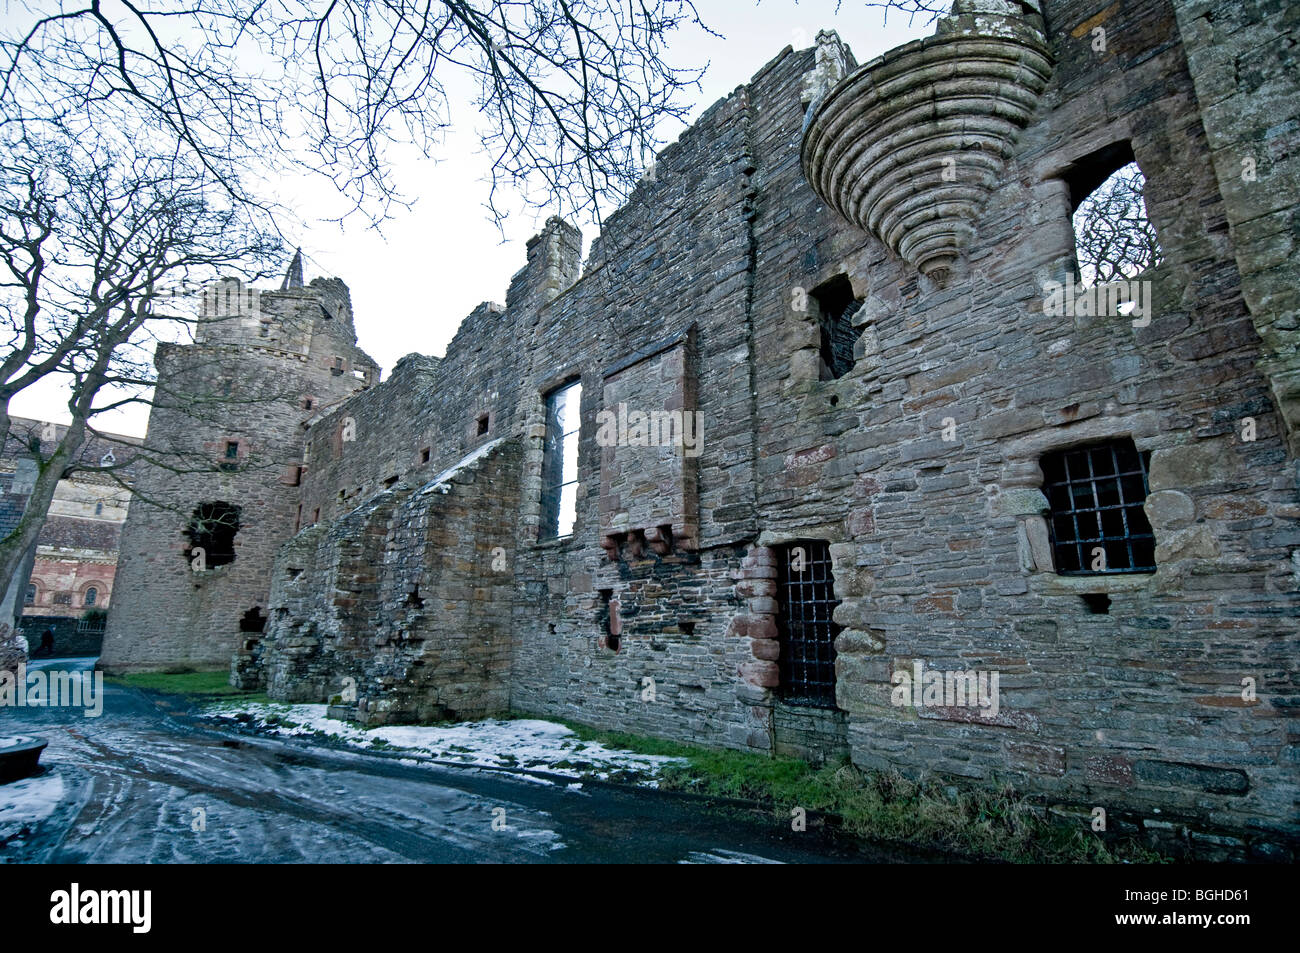 The ruins of the Bishops Palace Kirkwall, Mainland Orkney, Scotland. SCO 5828 Stock Photo